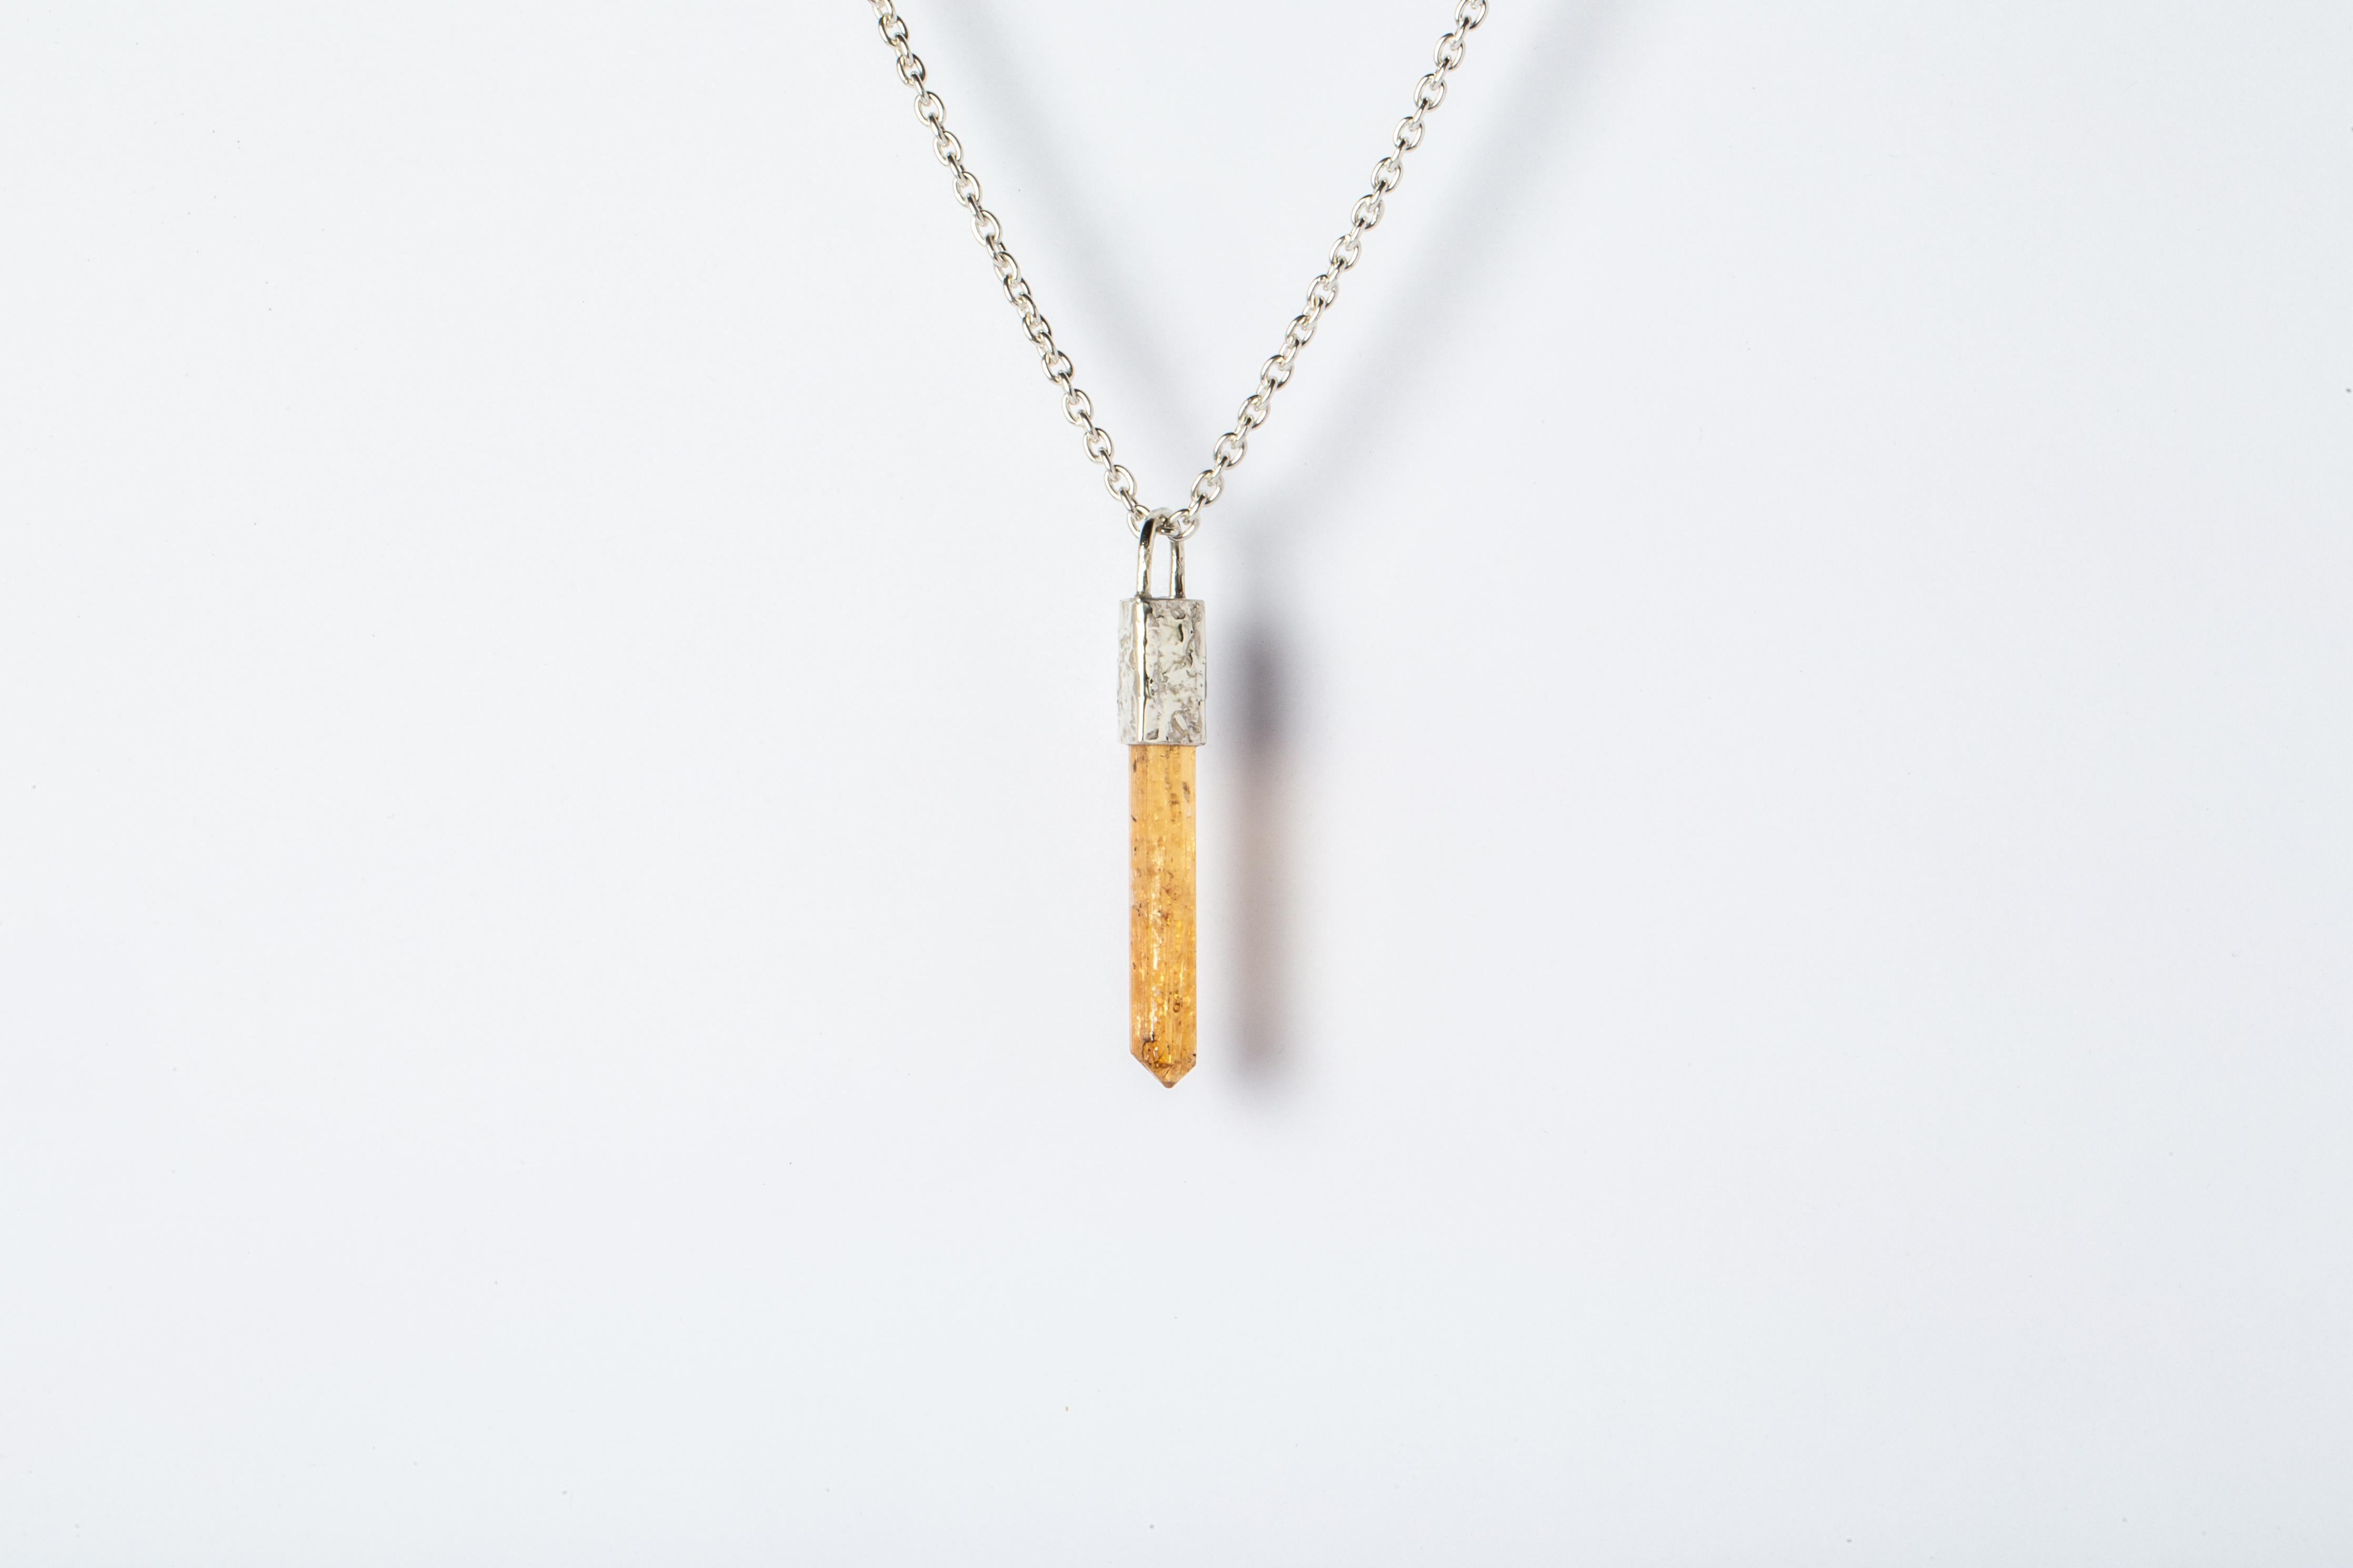 Talisman necklace in matte sterling silver with fused layer of 10k white gold and slab of rough imperial topaz. The Talisman series is an exploration into the power of natural crystals. The crystals used in these pieces are discovered through